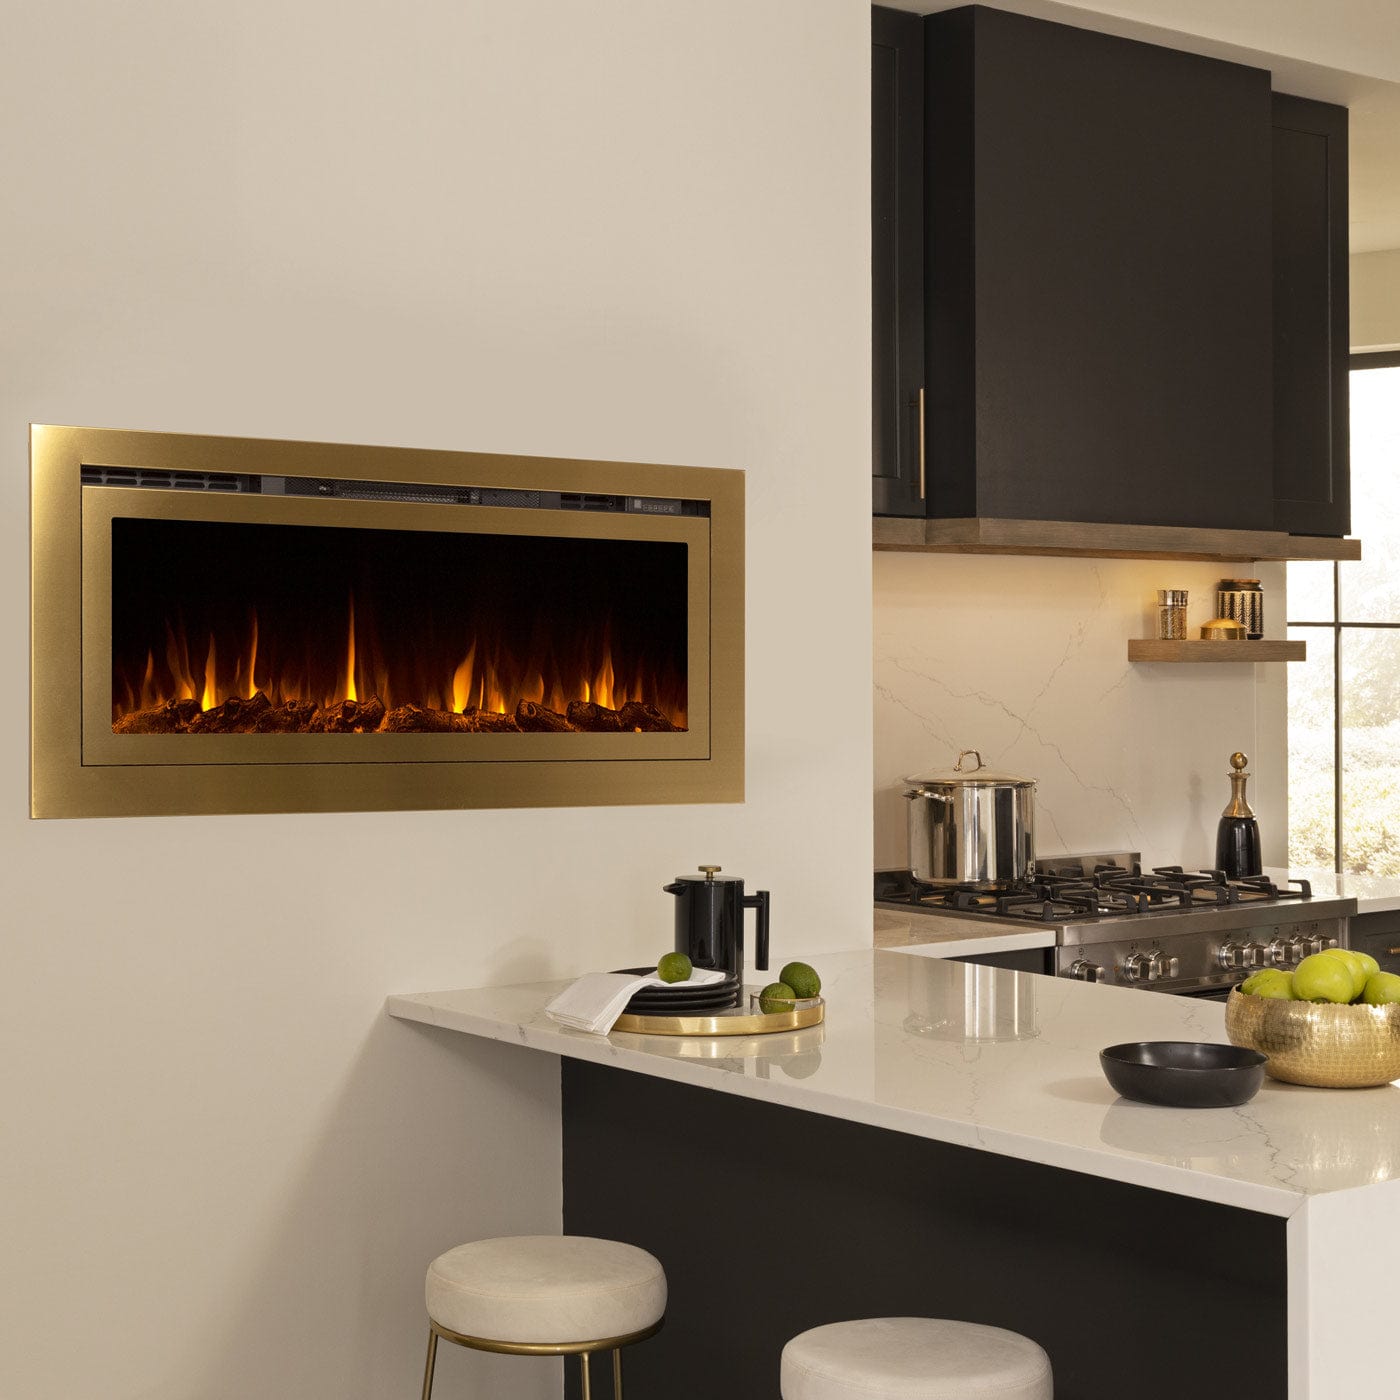 Touchstone Sideline Gold 86275 Smart Electric Fireplace in kitchen with gold accents